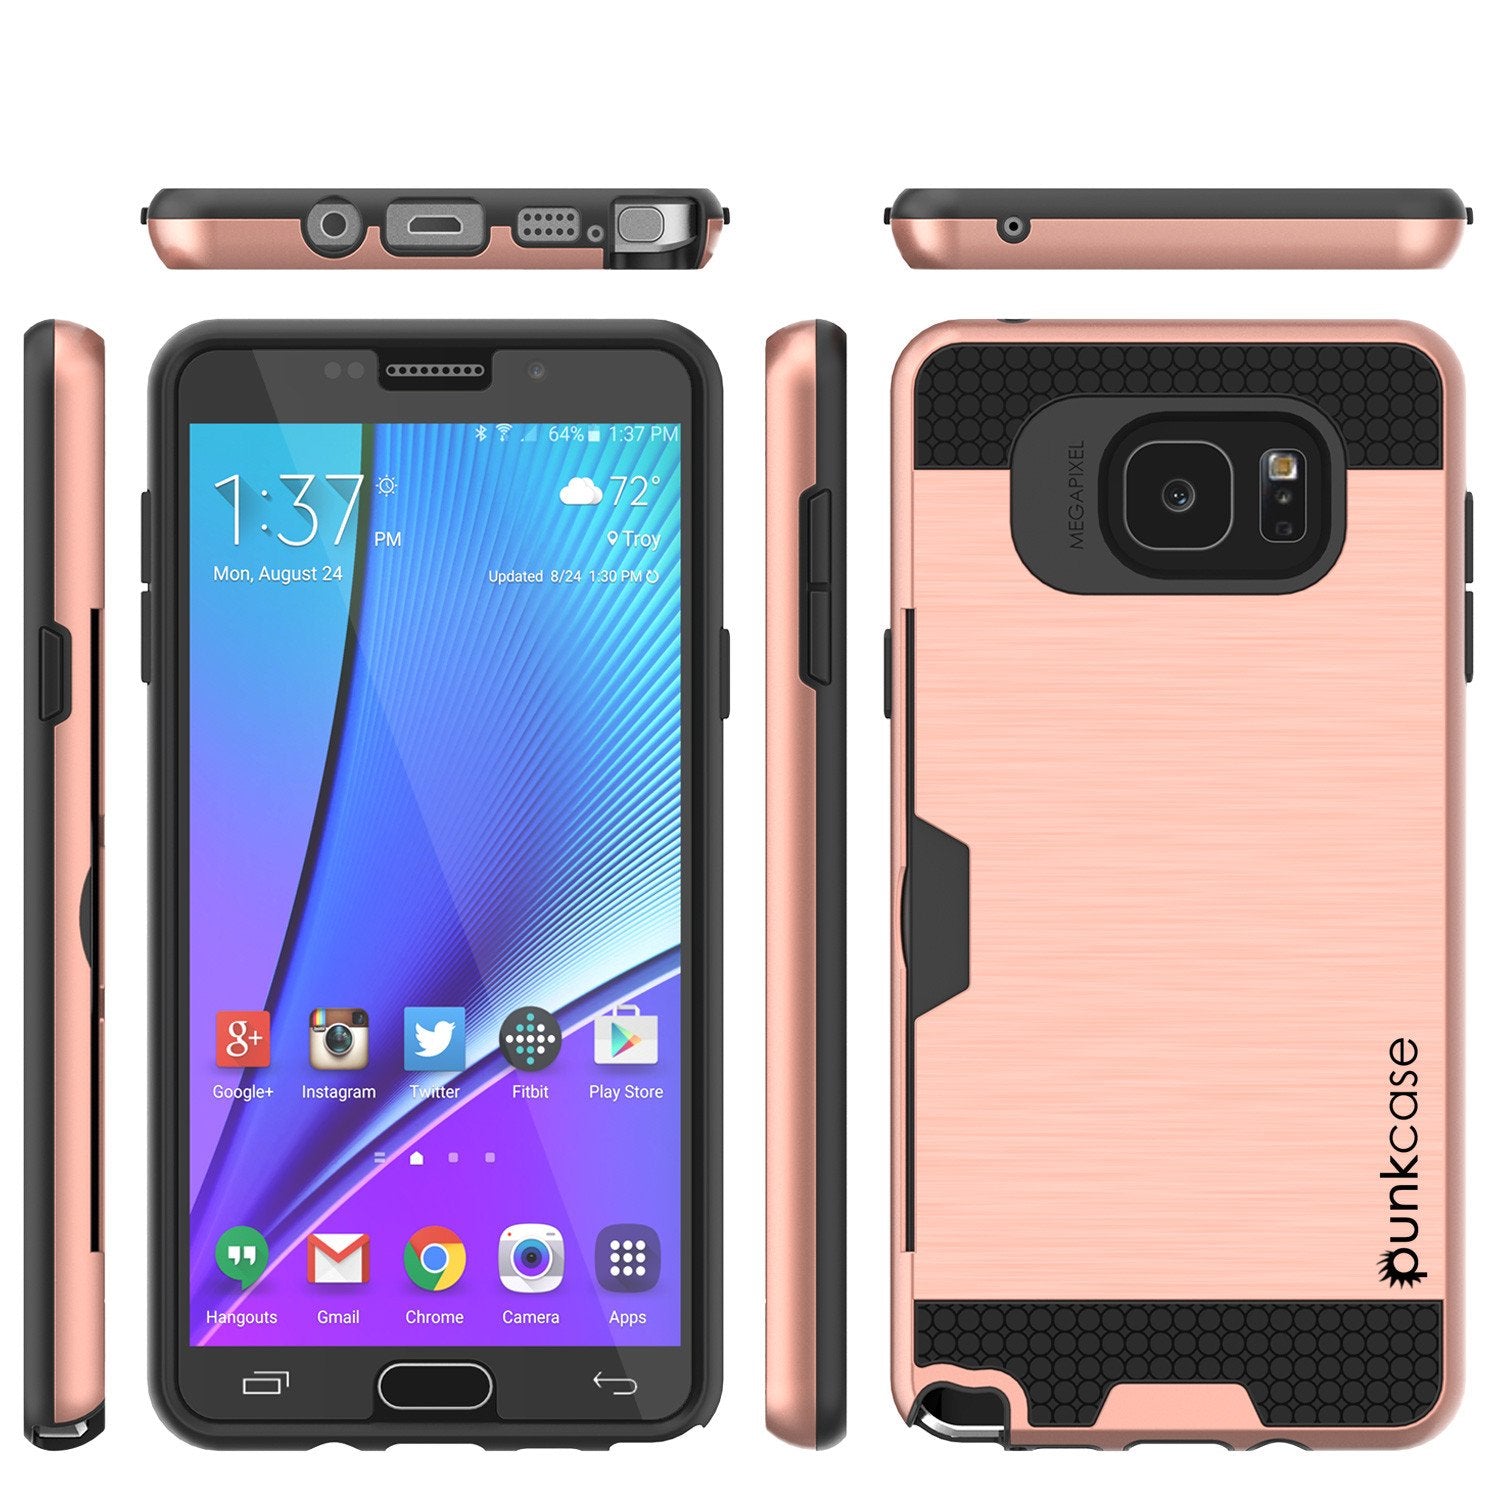 Galaxy Note 5 Case PunkCase SLOT Rose Series Slim Armor Soft Cover Case w/ Tempered Glass